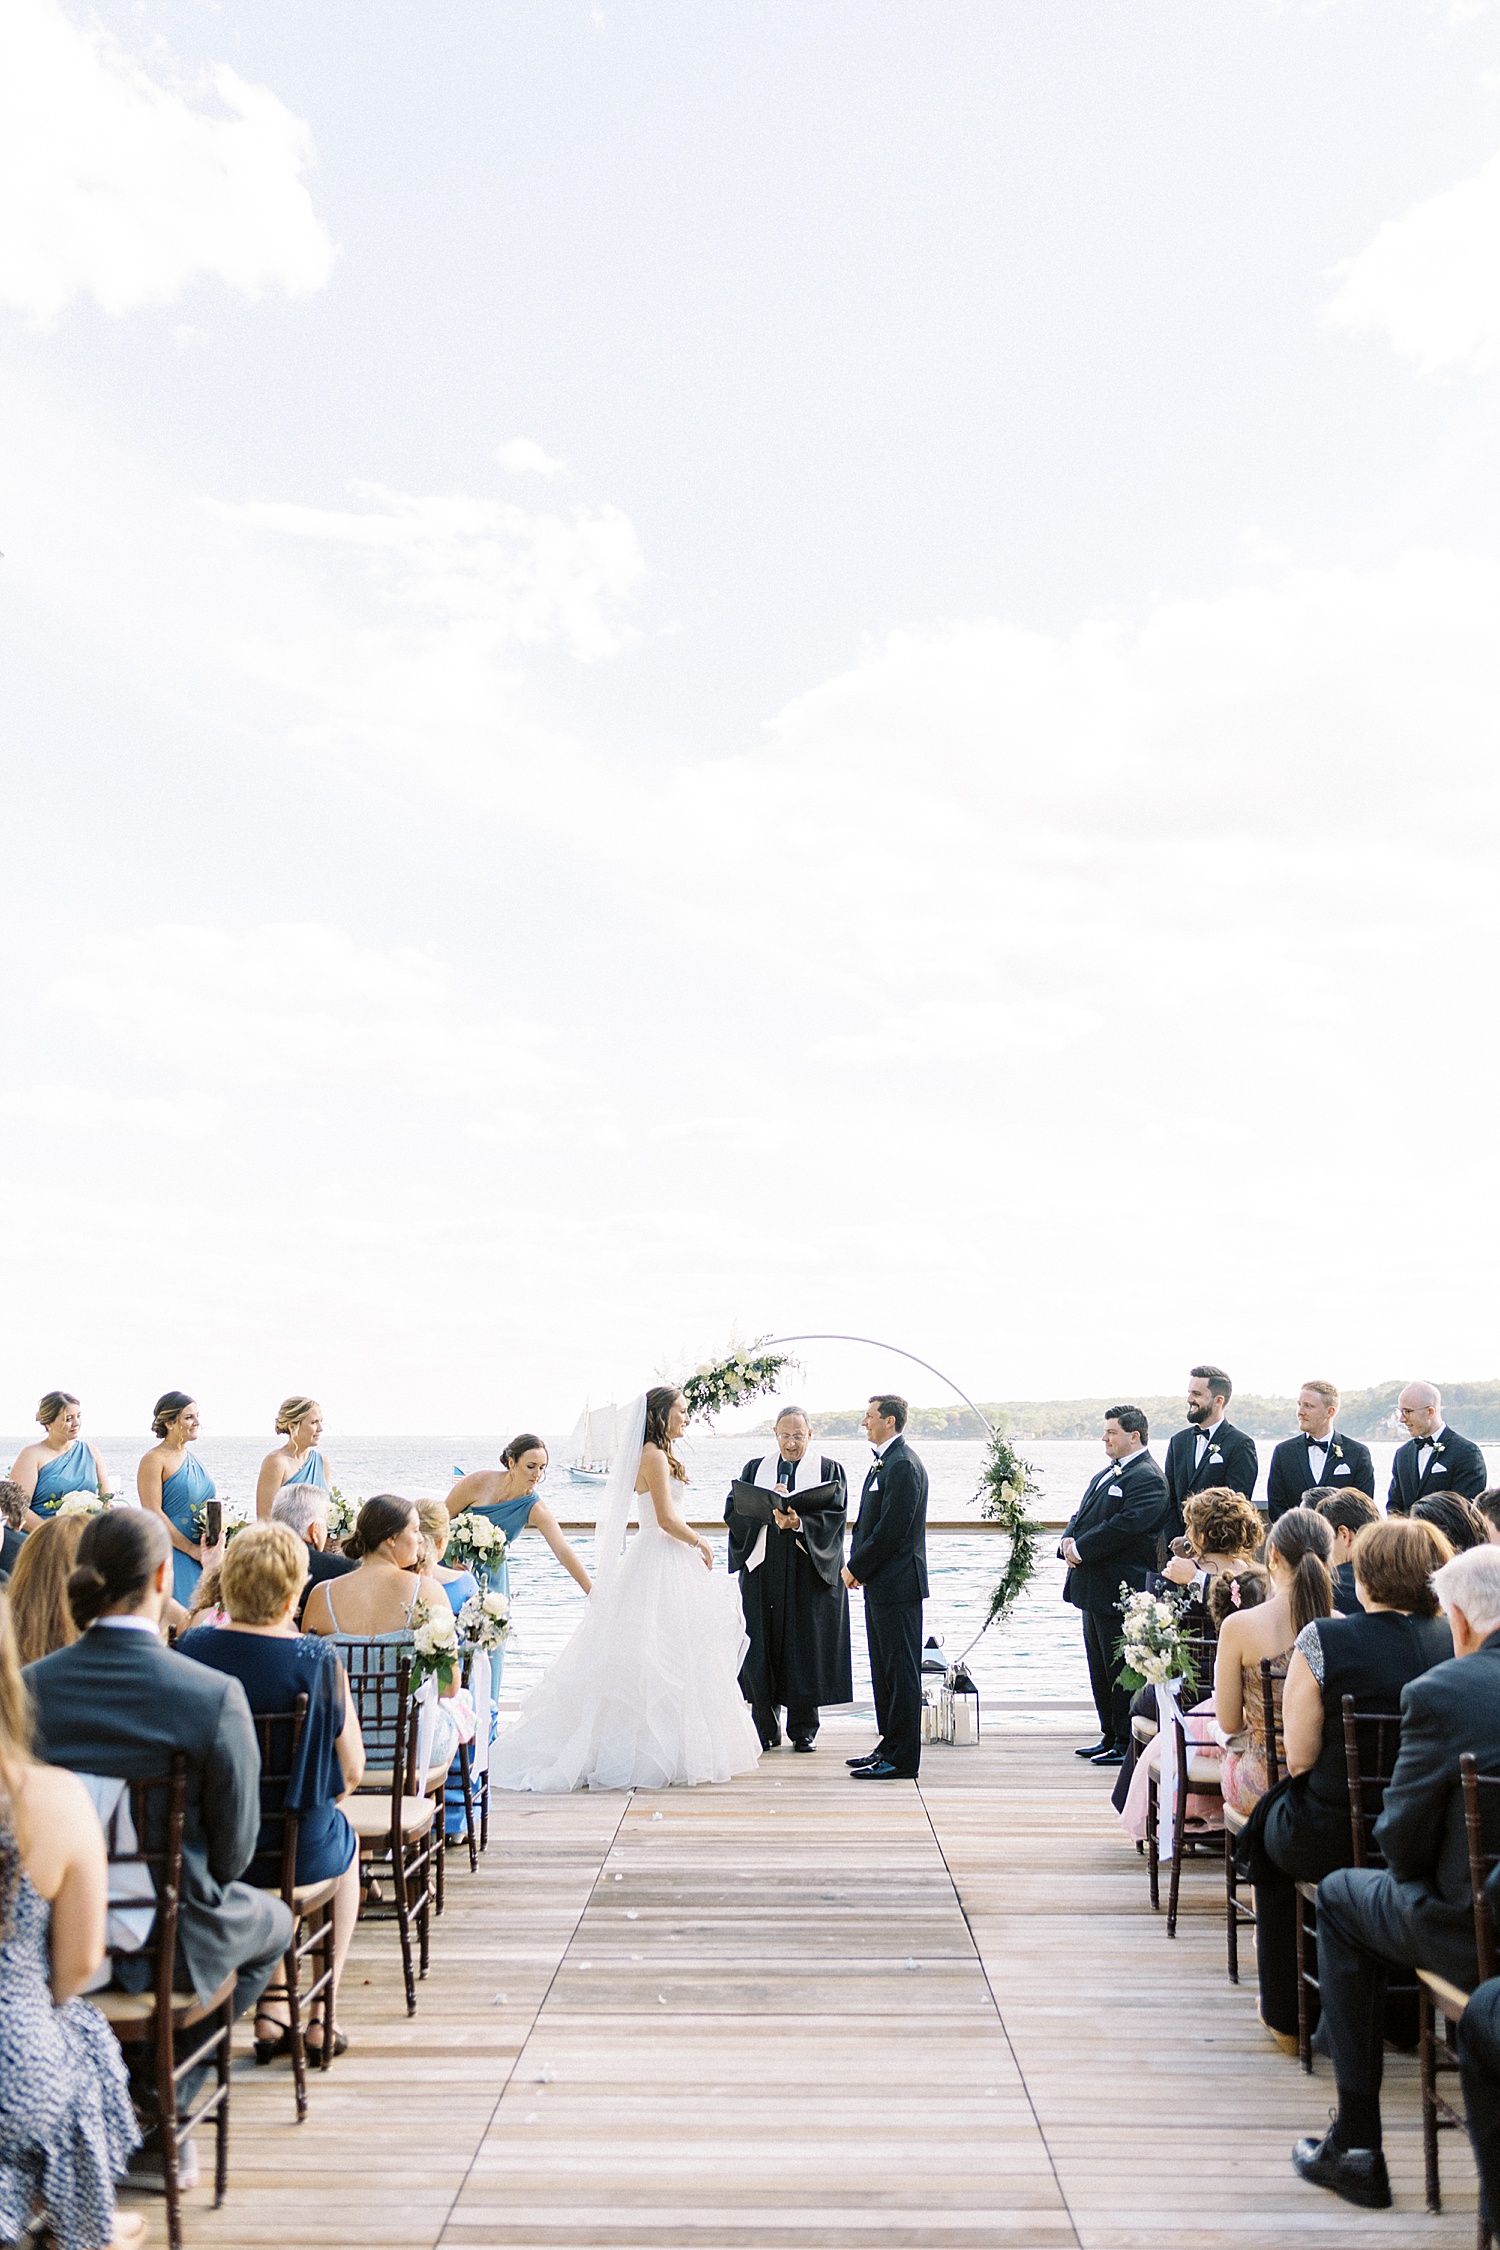 Bride and groom at the alter in front of water by Lynne Reznick photography